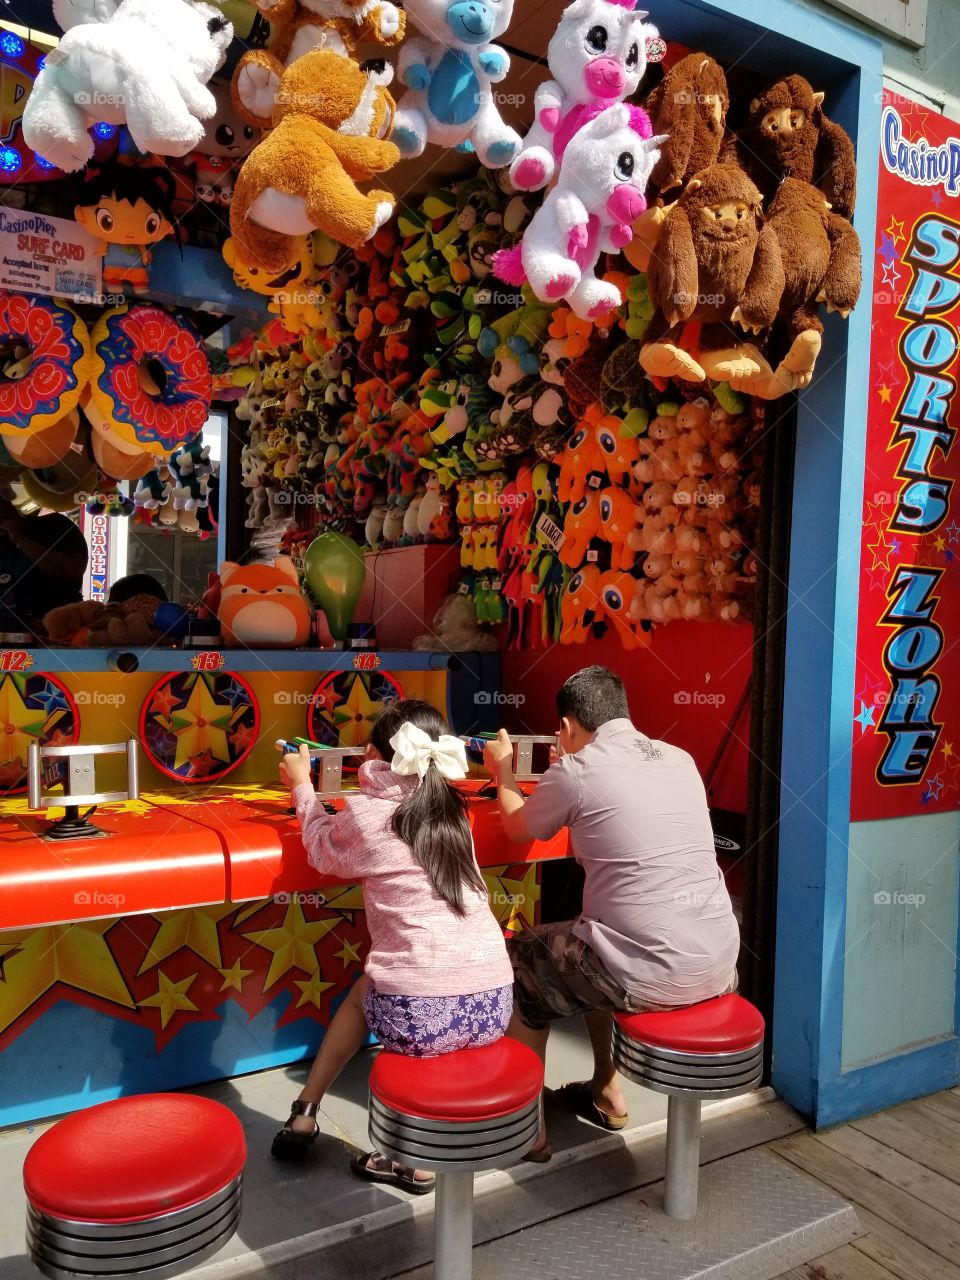 Busy with boardwalk games. Need to win to get a stuffed toy animal.